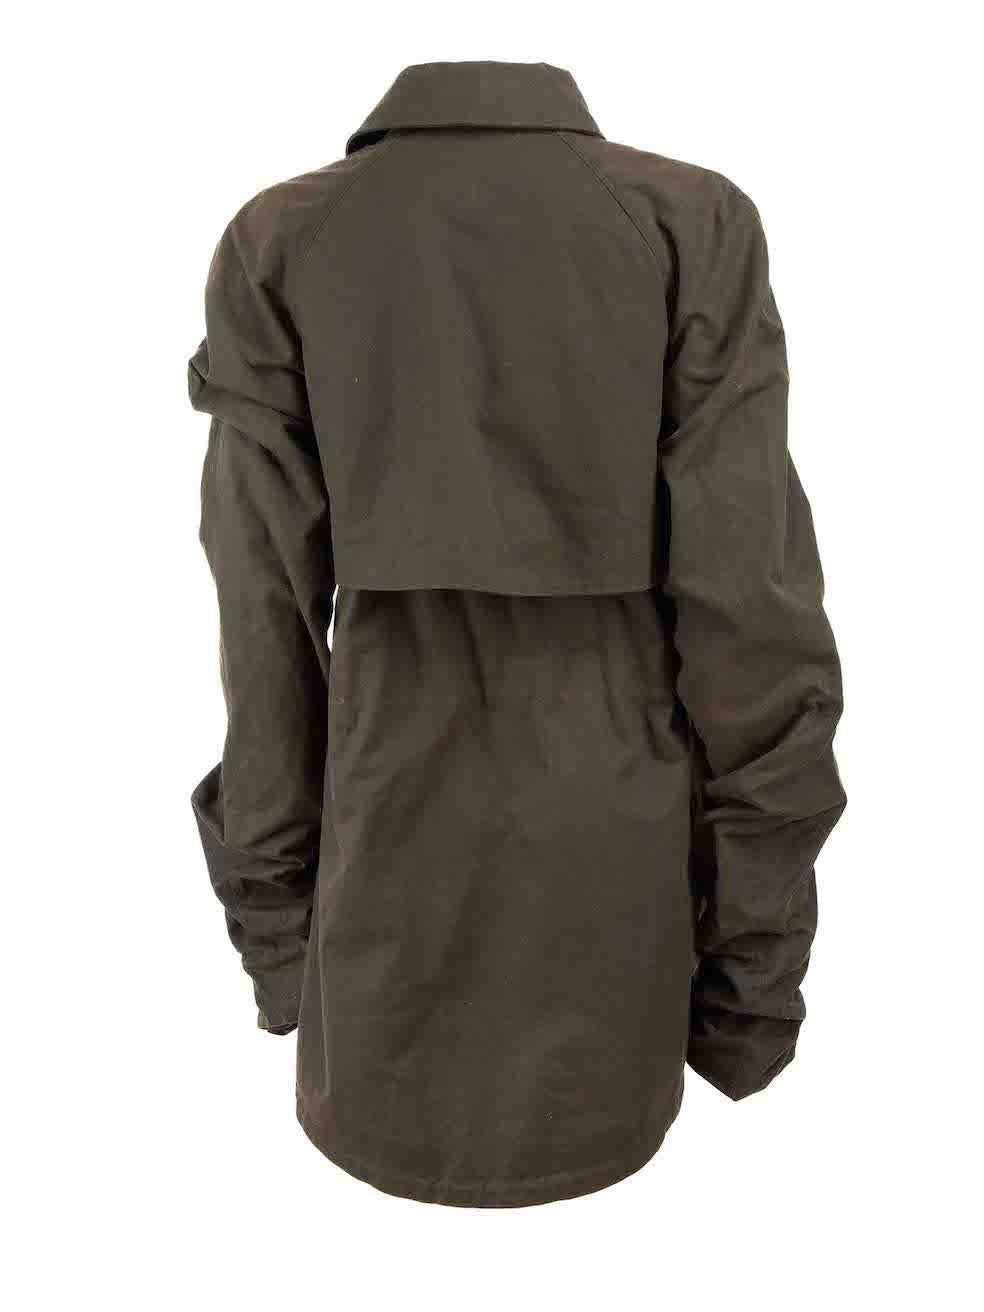 Saint Laurent Khaki Ruched Sleeve Parka Coat Size M In Good Condition For Sale In London, GB